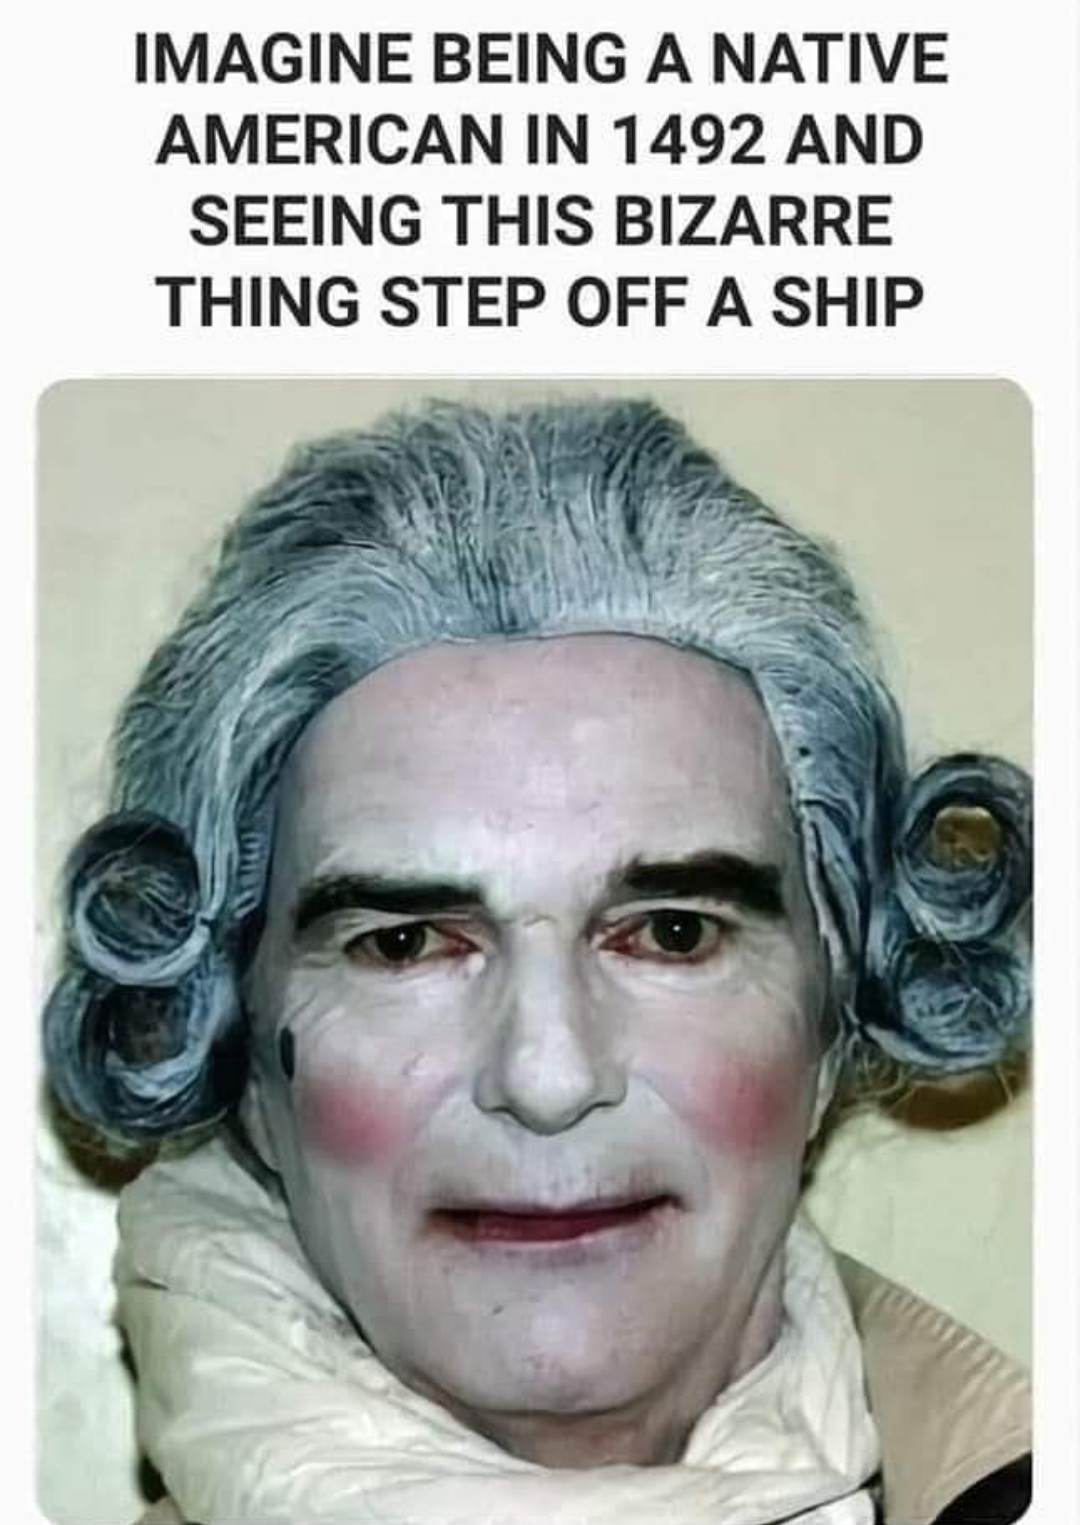 daily dose of pics and memes - imagine being native american - Imagine Being A Native American In 1492 And Seeing This Bizarre Thing Step Off A Ship